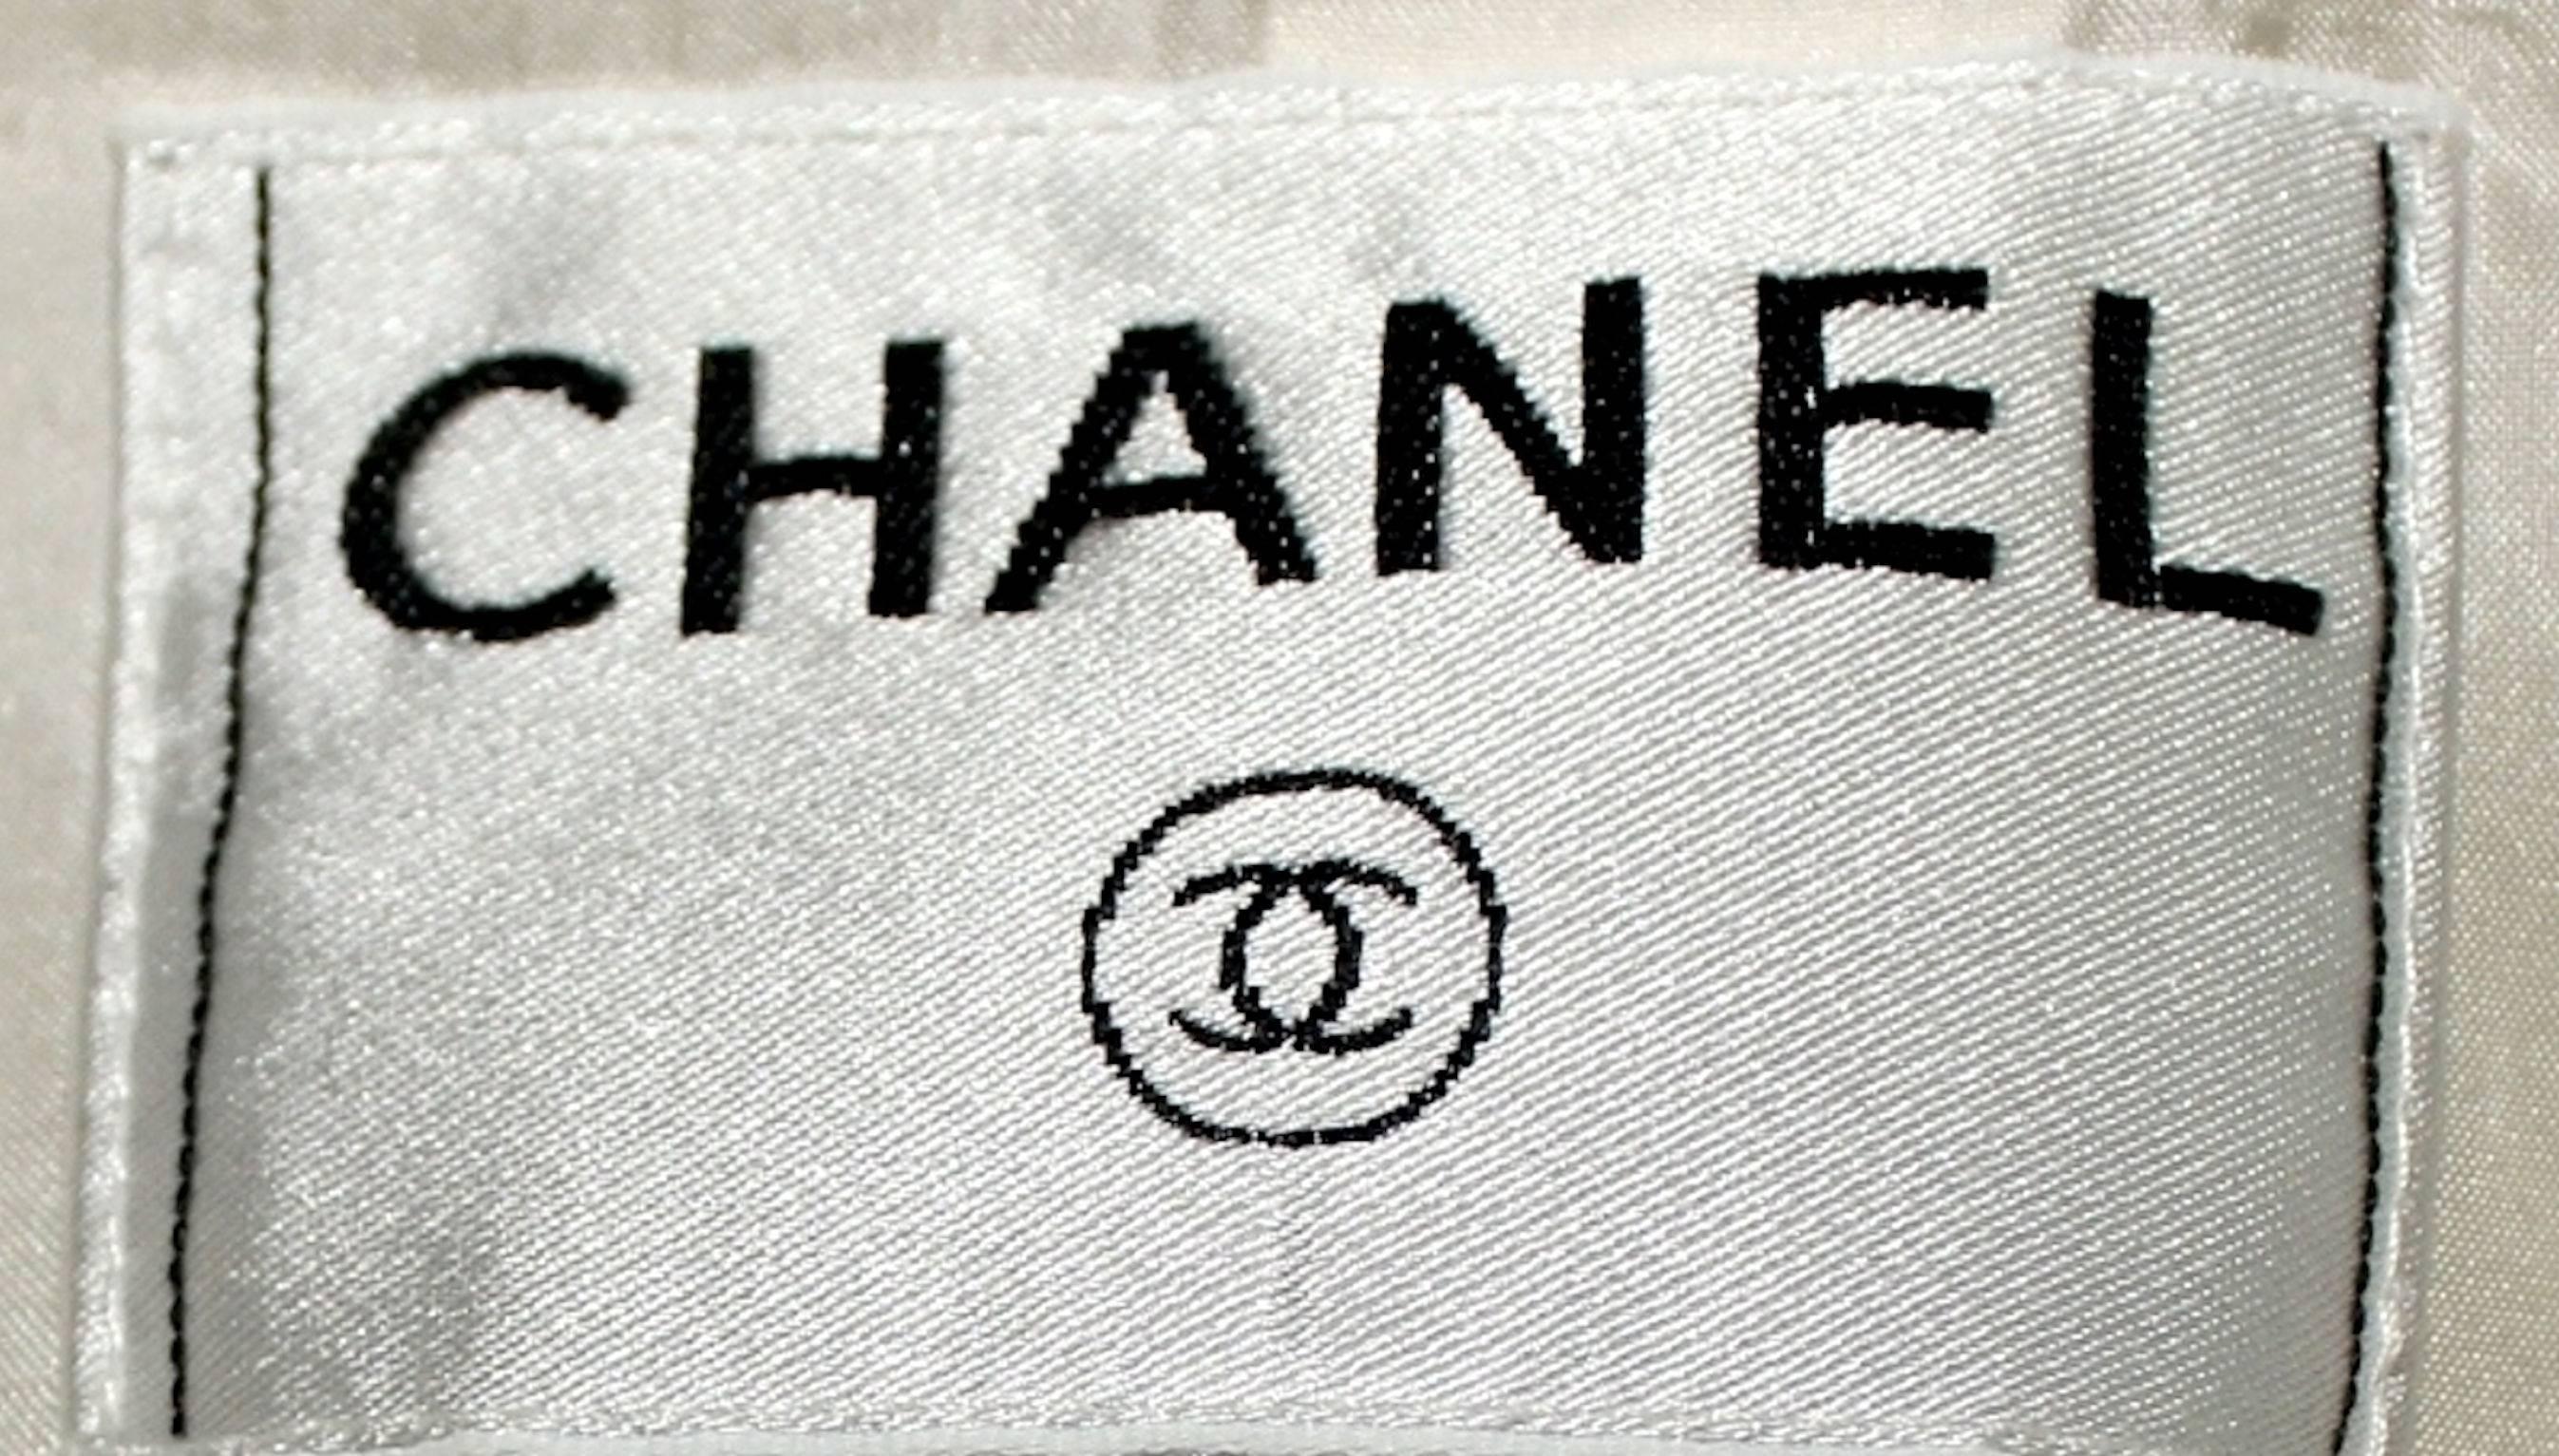 Beige Rare Collector's CHANEL Signature Tweed White and Black Coat with Belt